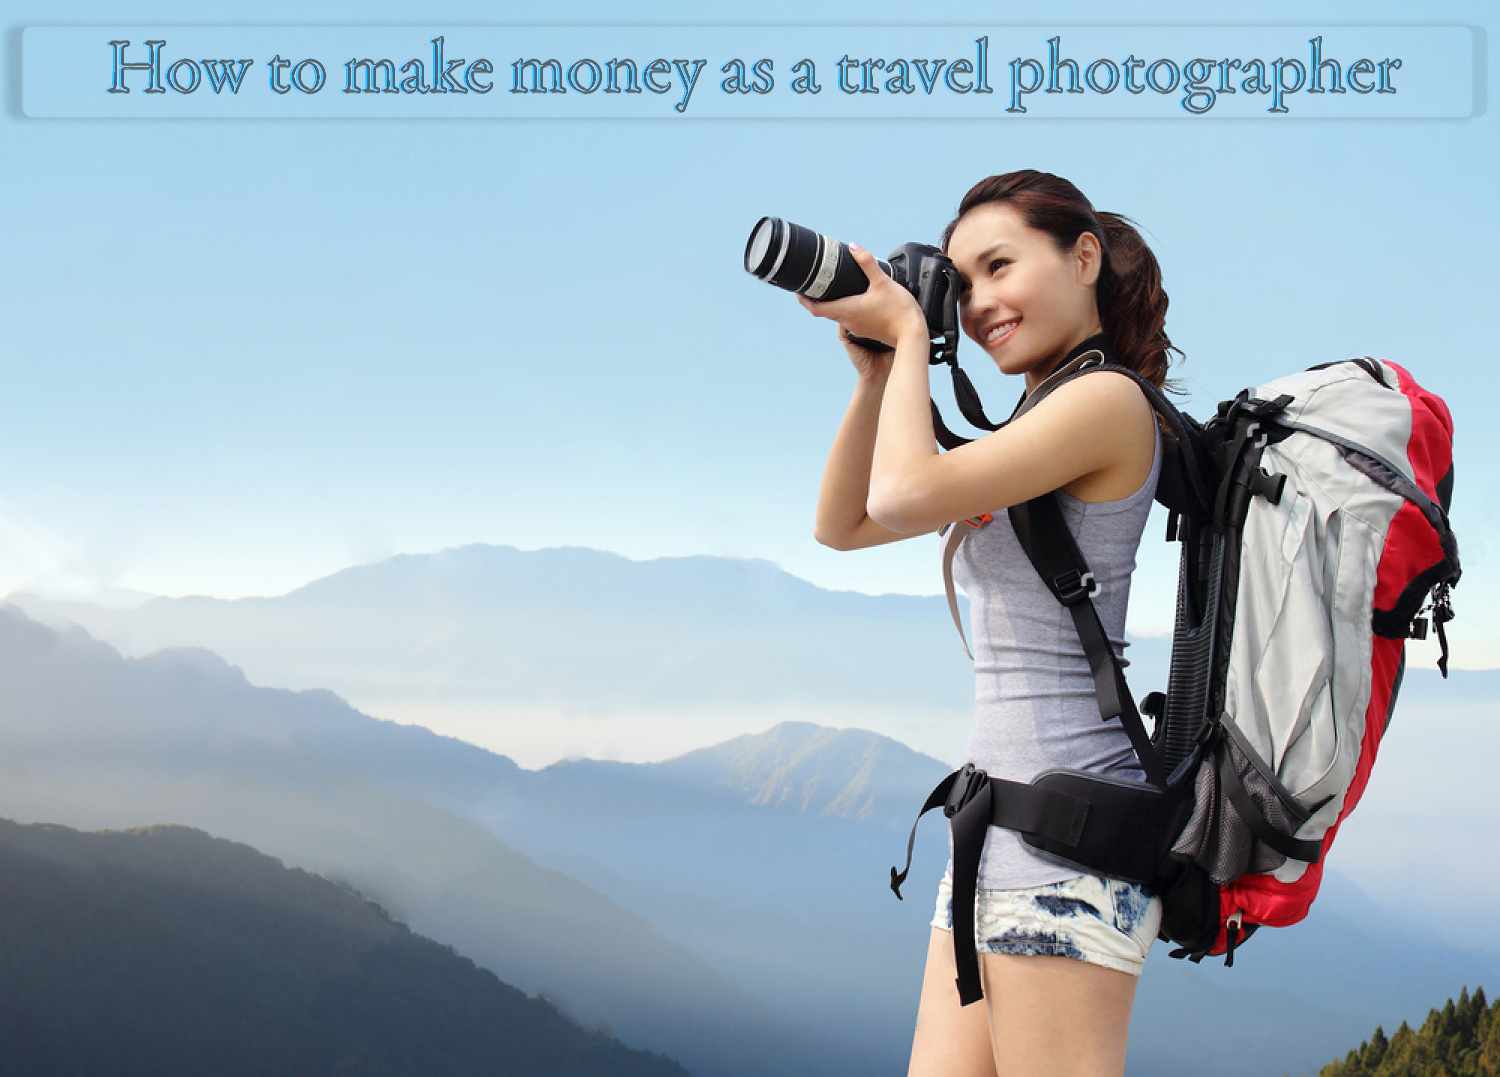 travel photography business ideas